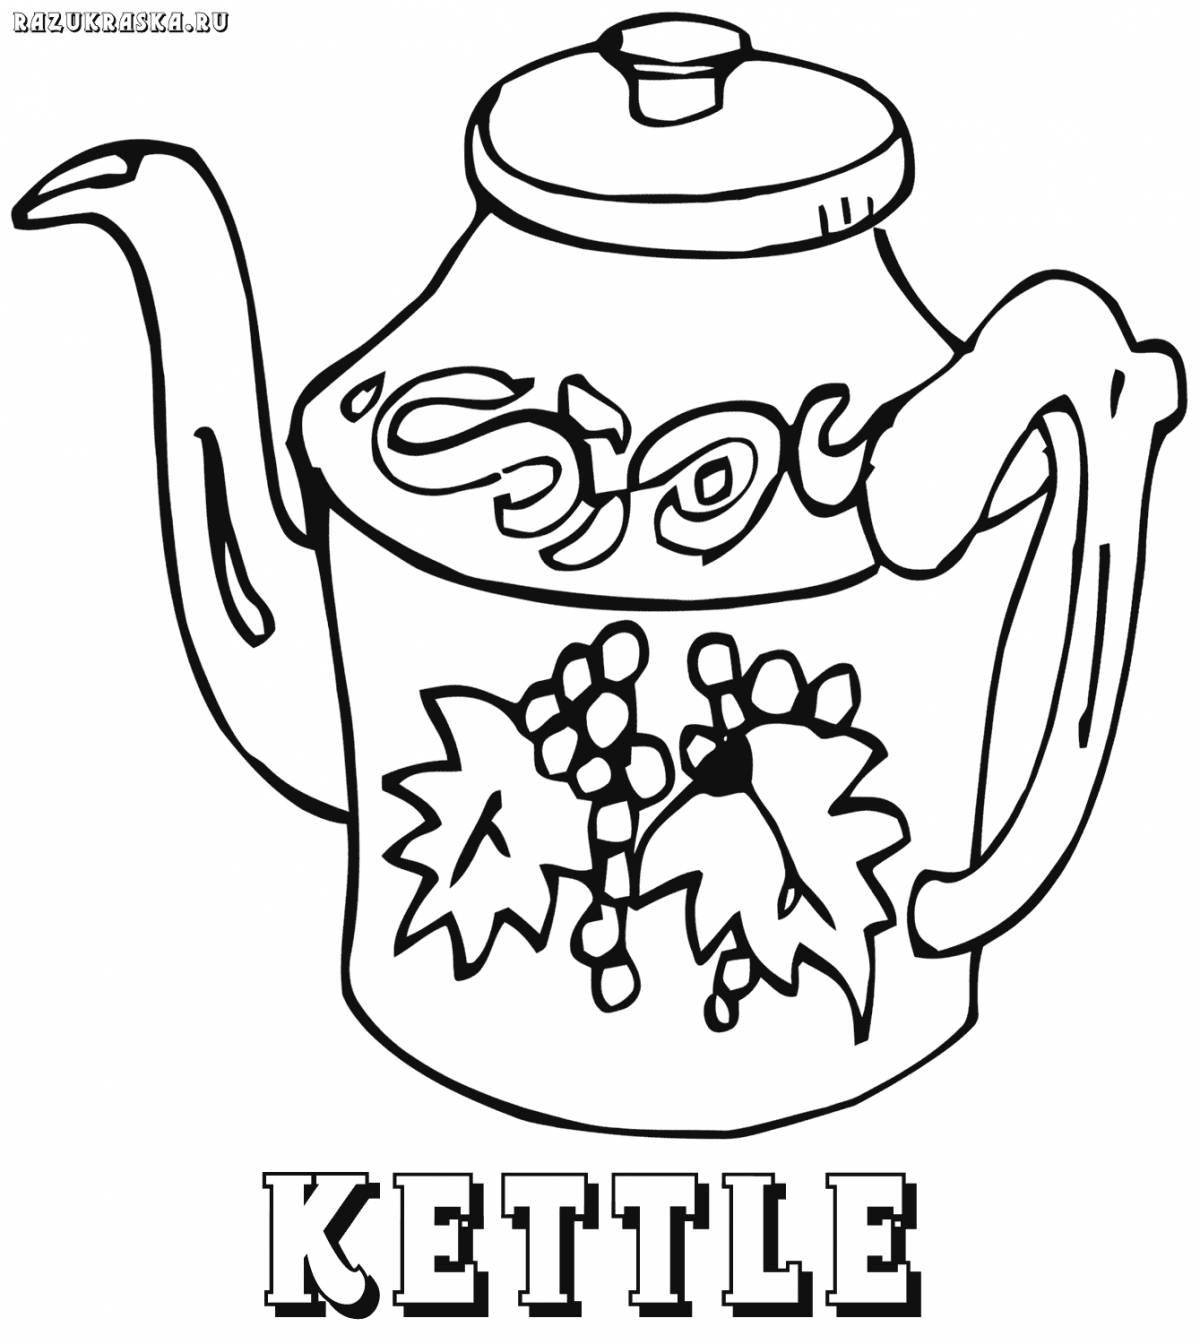 Coloring book magic teapot for children 2-3 years old